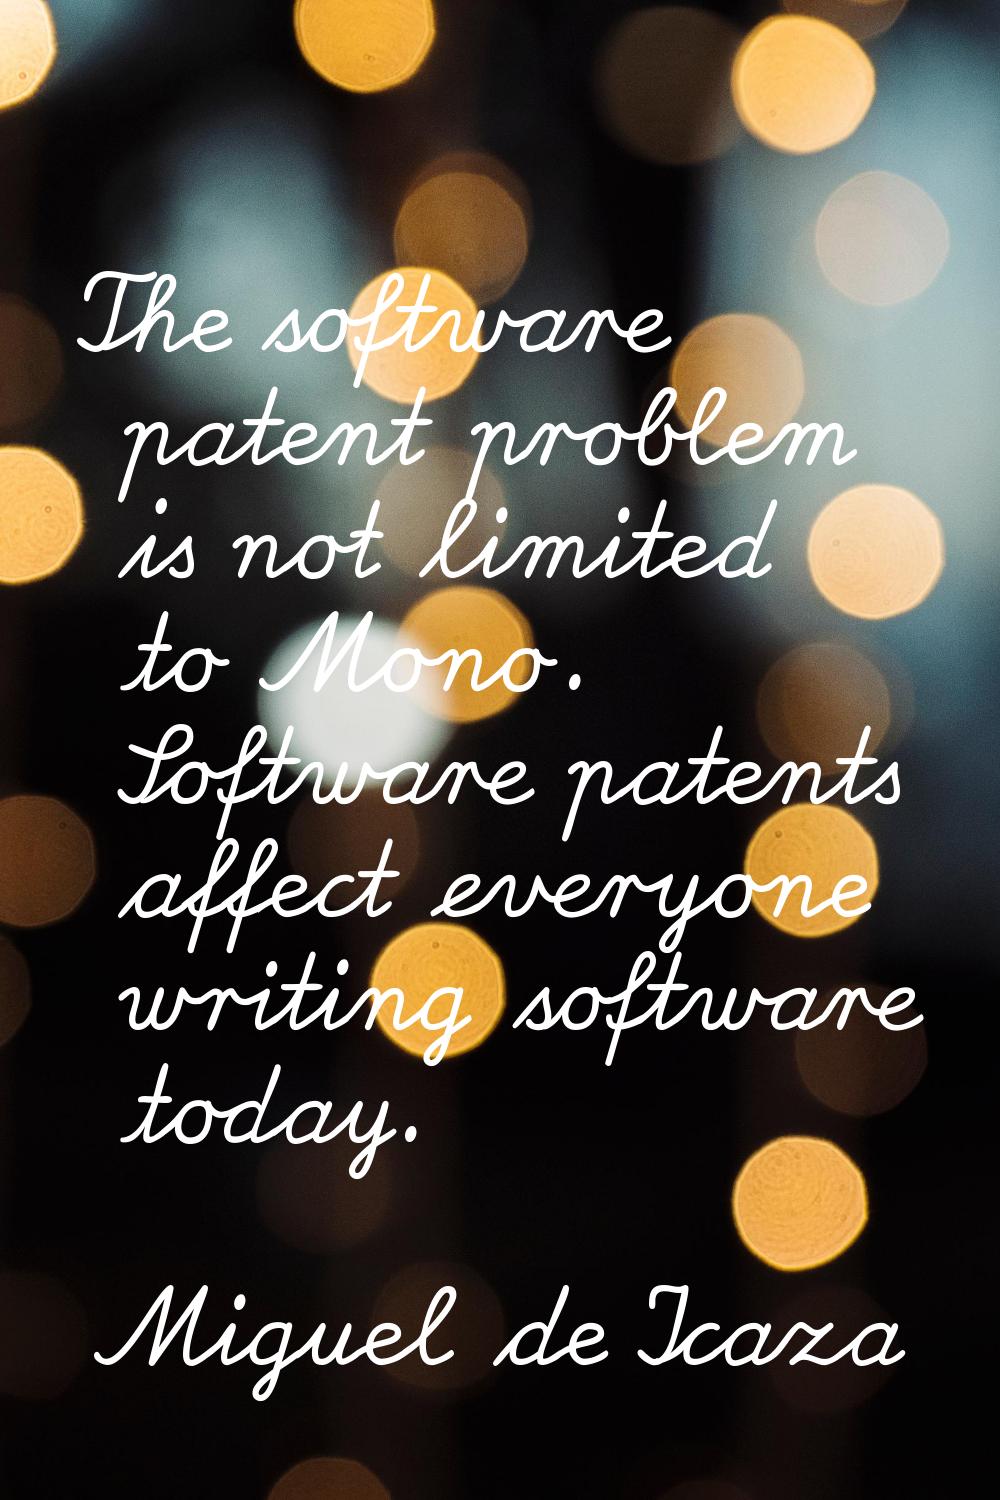 The software patent problem is not limited to Mono. Software patents affect everyone writing softwa